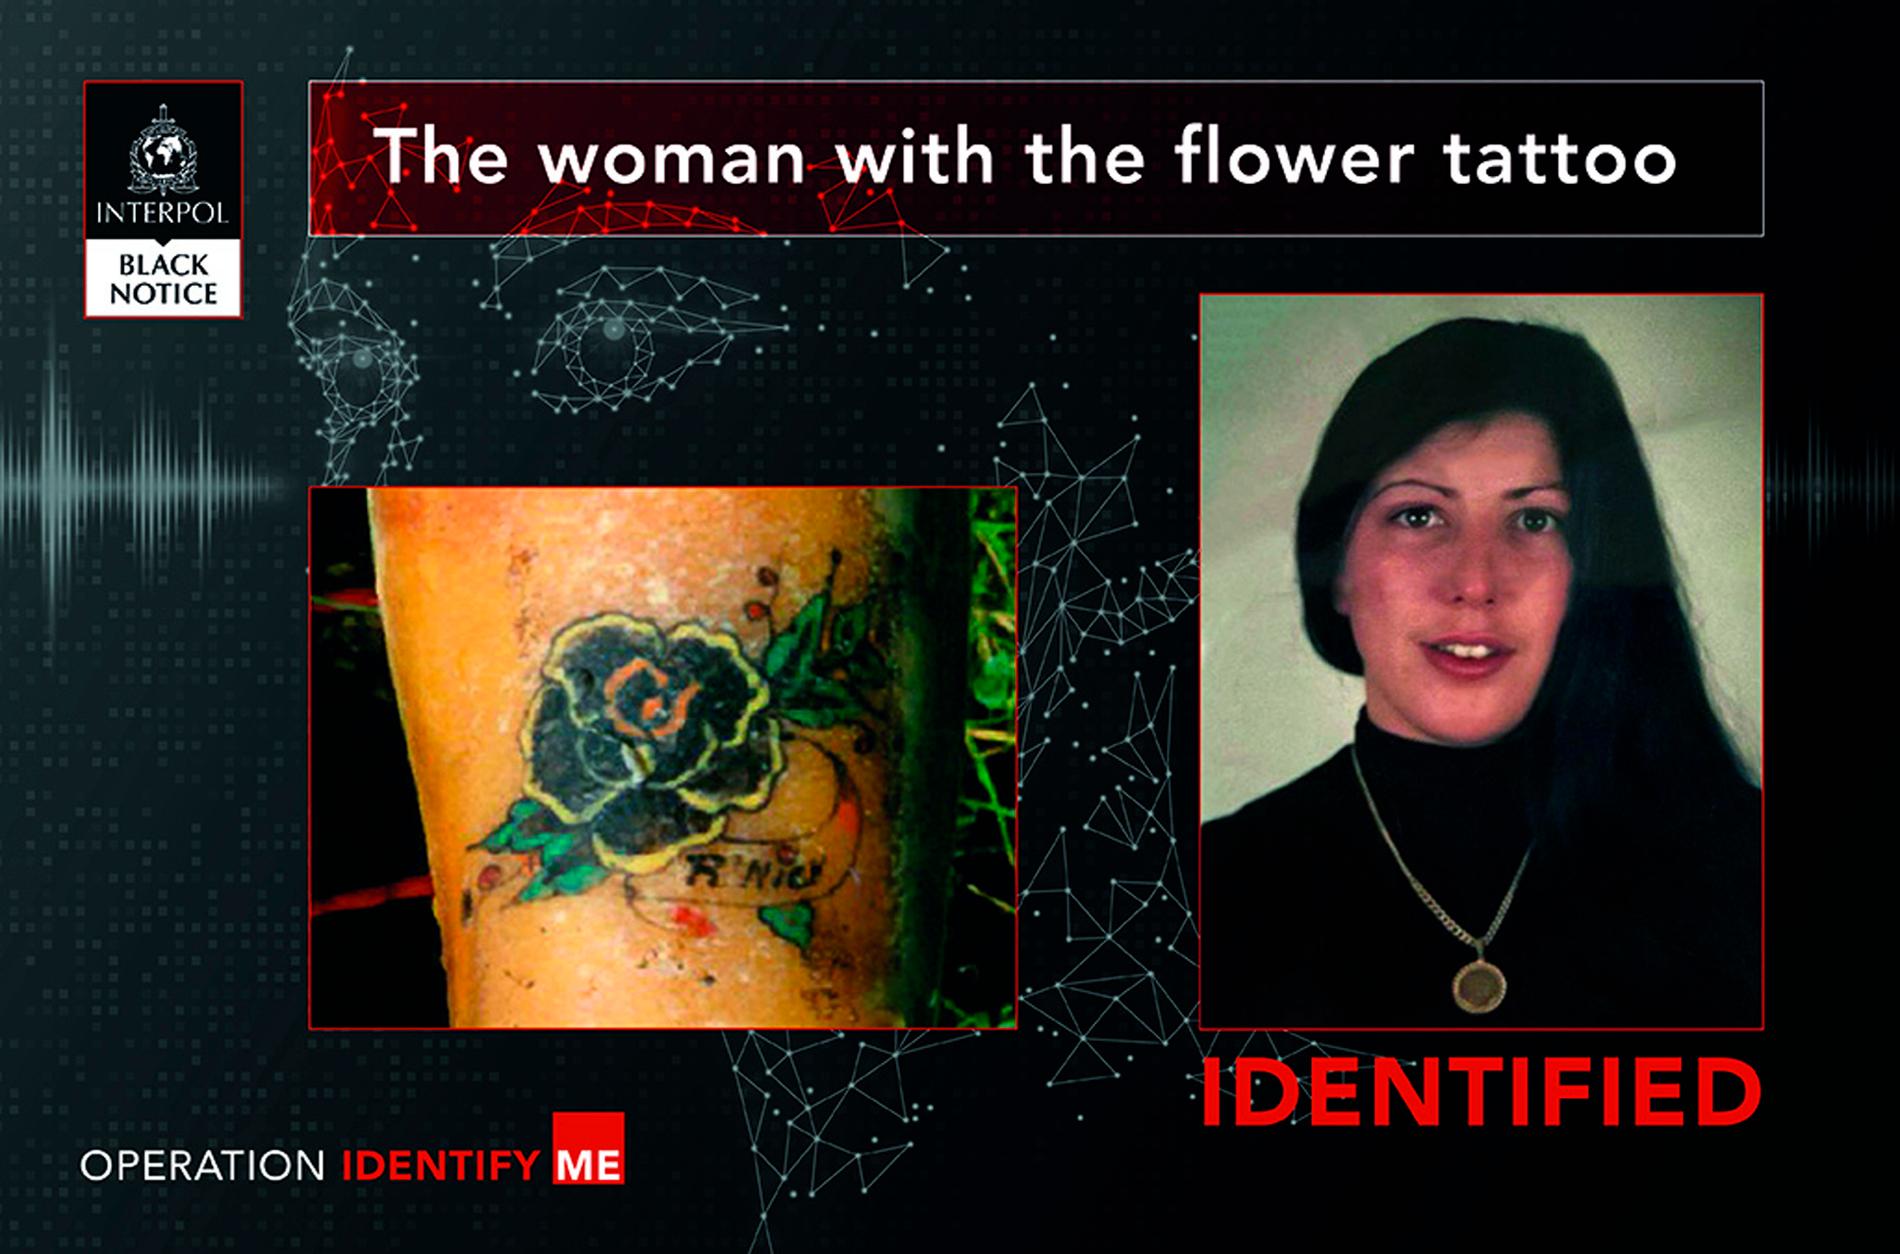 Rita Roberts: Identification of the Woman with the Flower Tattoo and the Cold-Case Murder in Antwerp